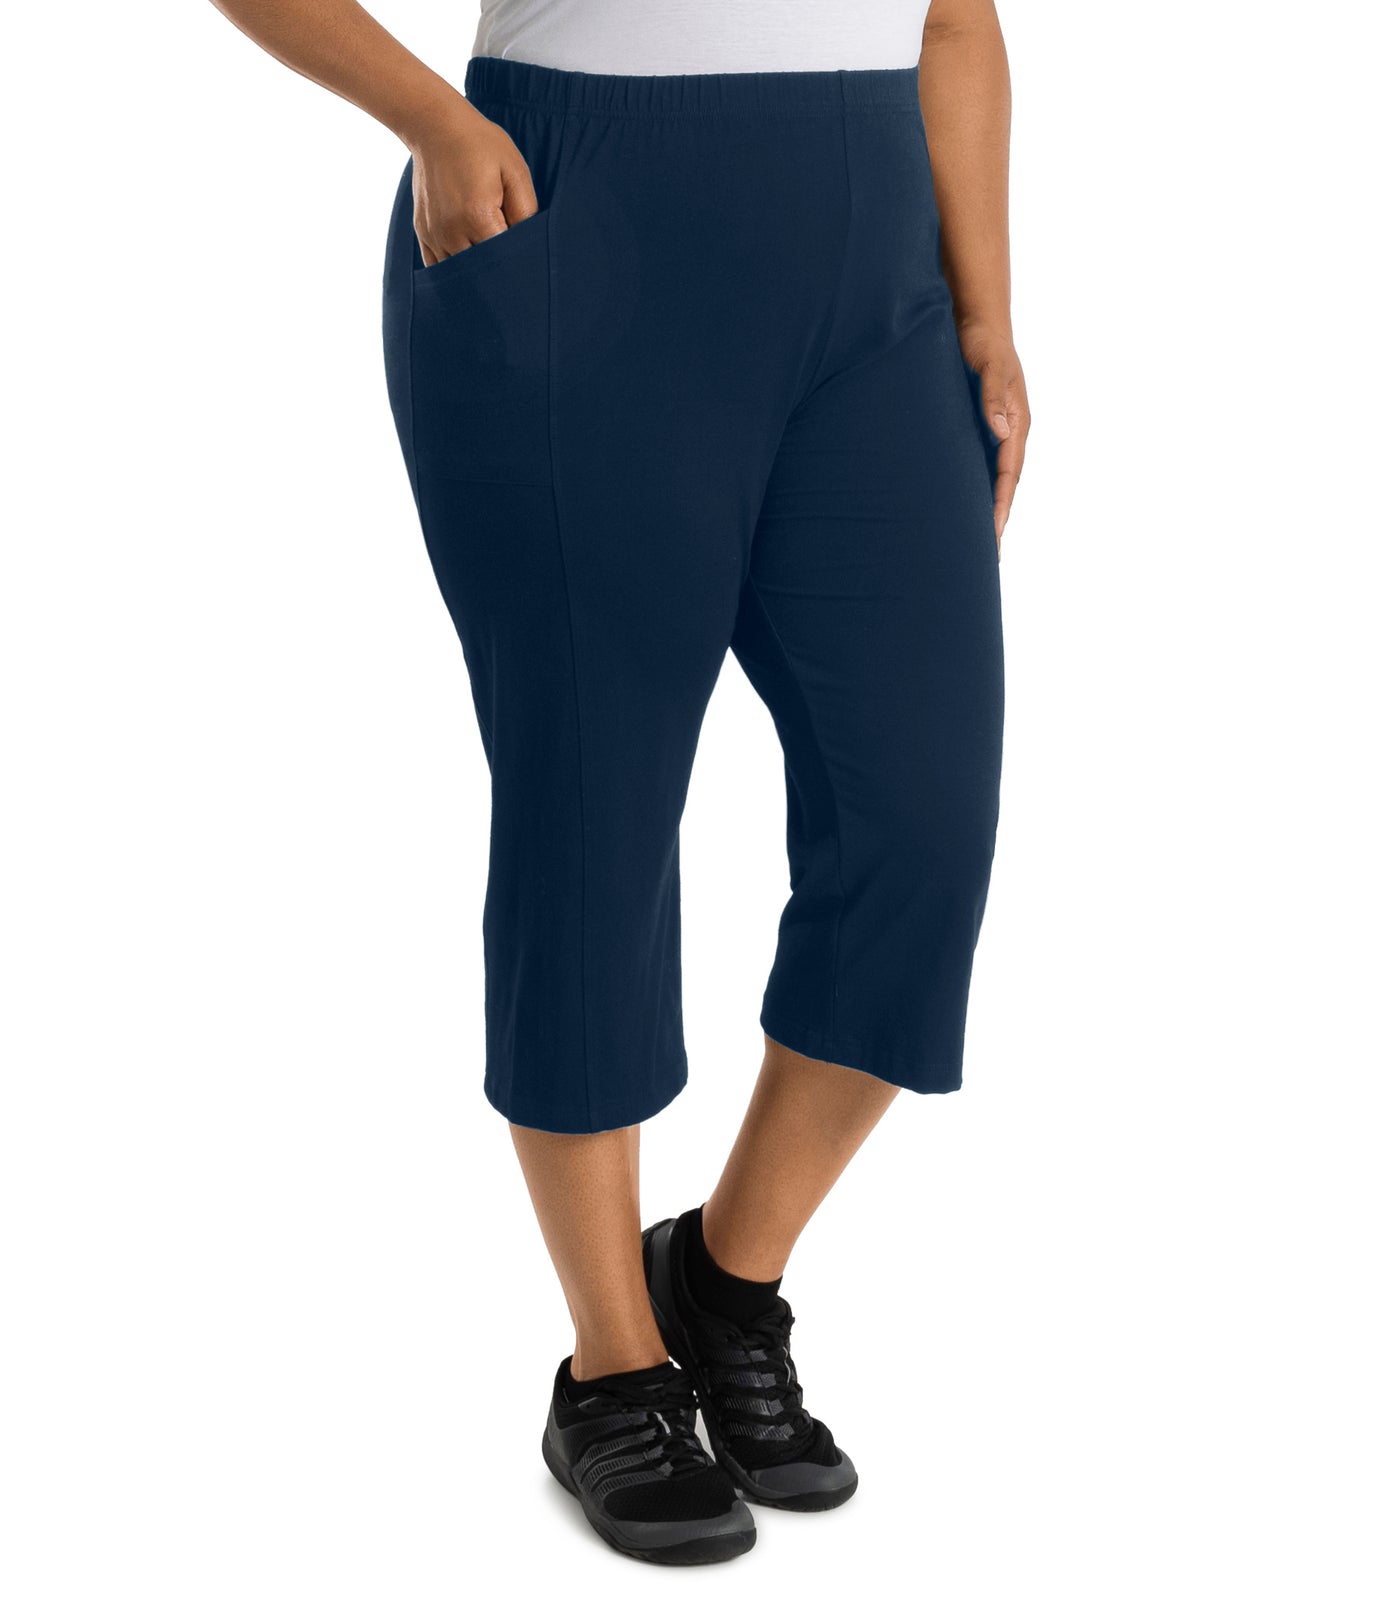 Plus size woman is facing at a side angle, right hand in pocket, left arm and hand to side, wearing JunoActive Stretch Naturals side pocket capri pant bottom. The hemline comes to mid-calf and hugs the body without being skin tight. Color is indigo.